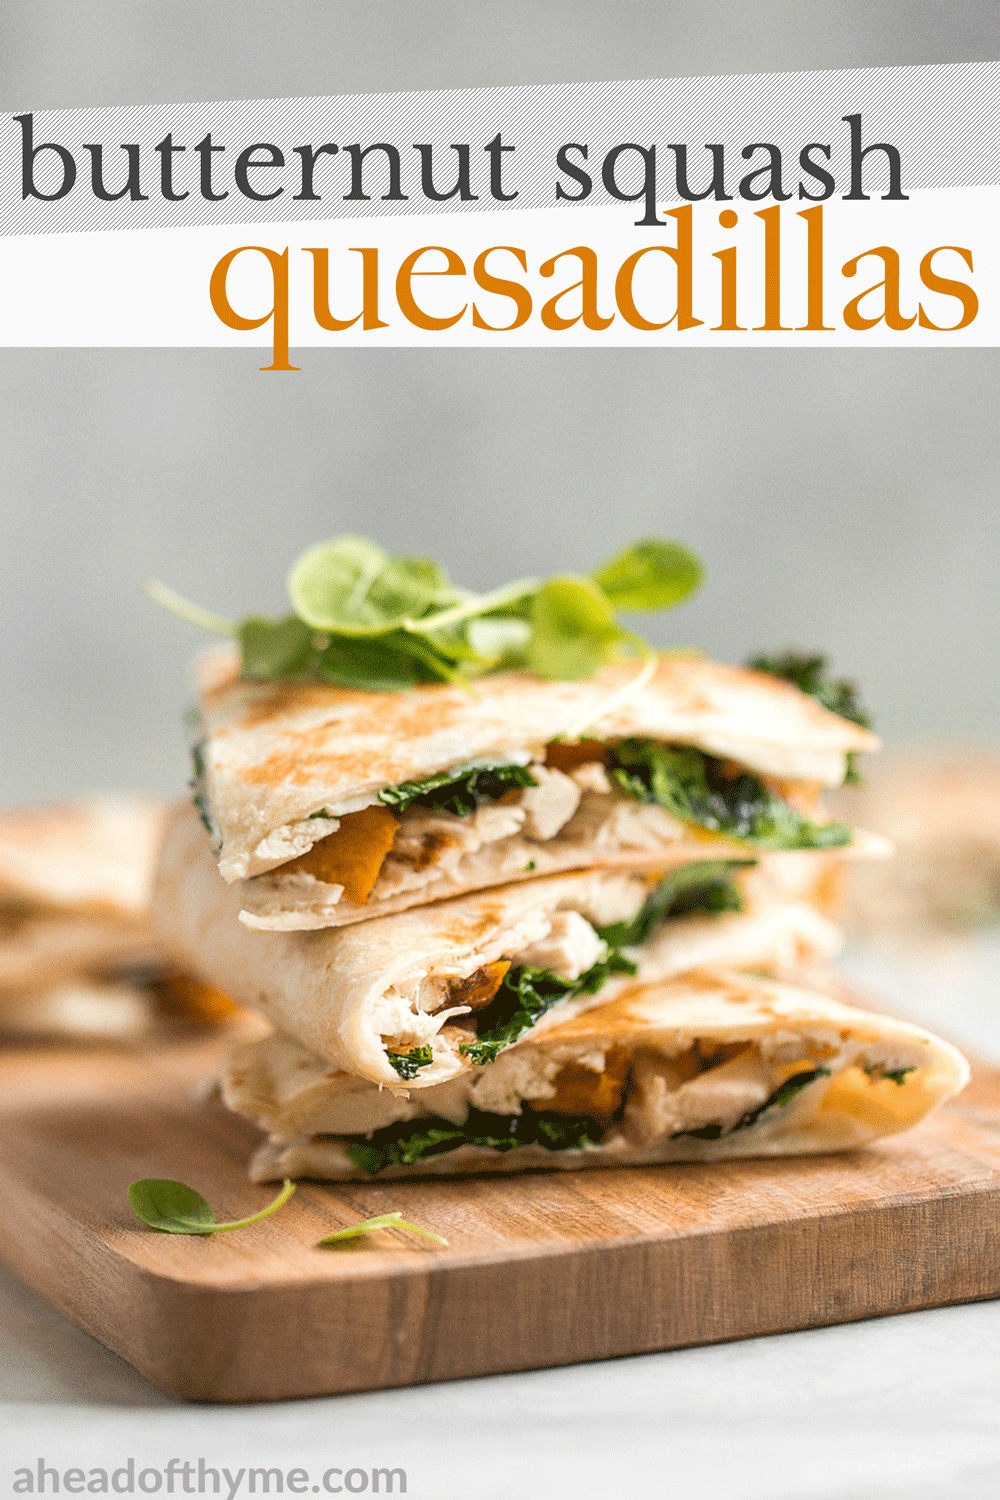 Butternut Squash Quesadillas with Chicken and Kale